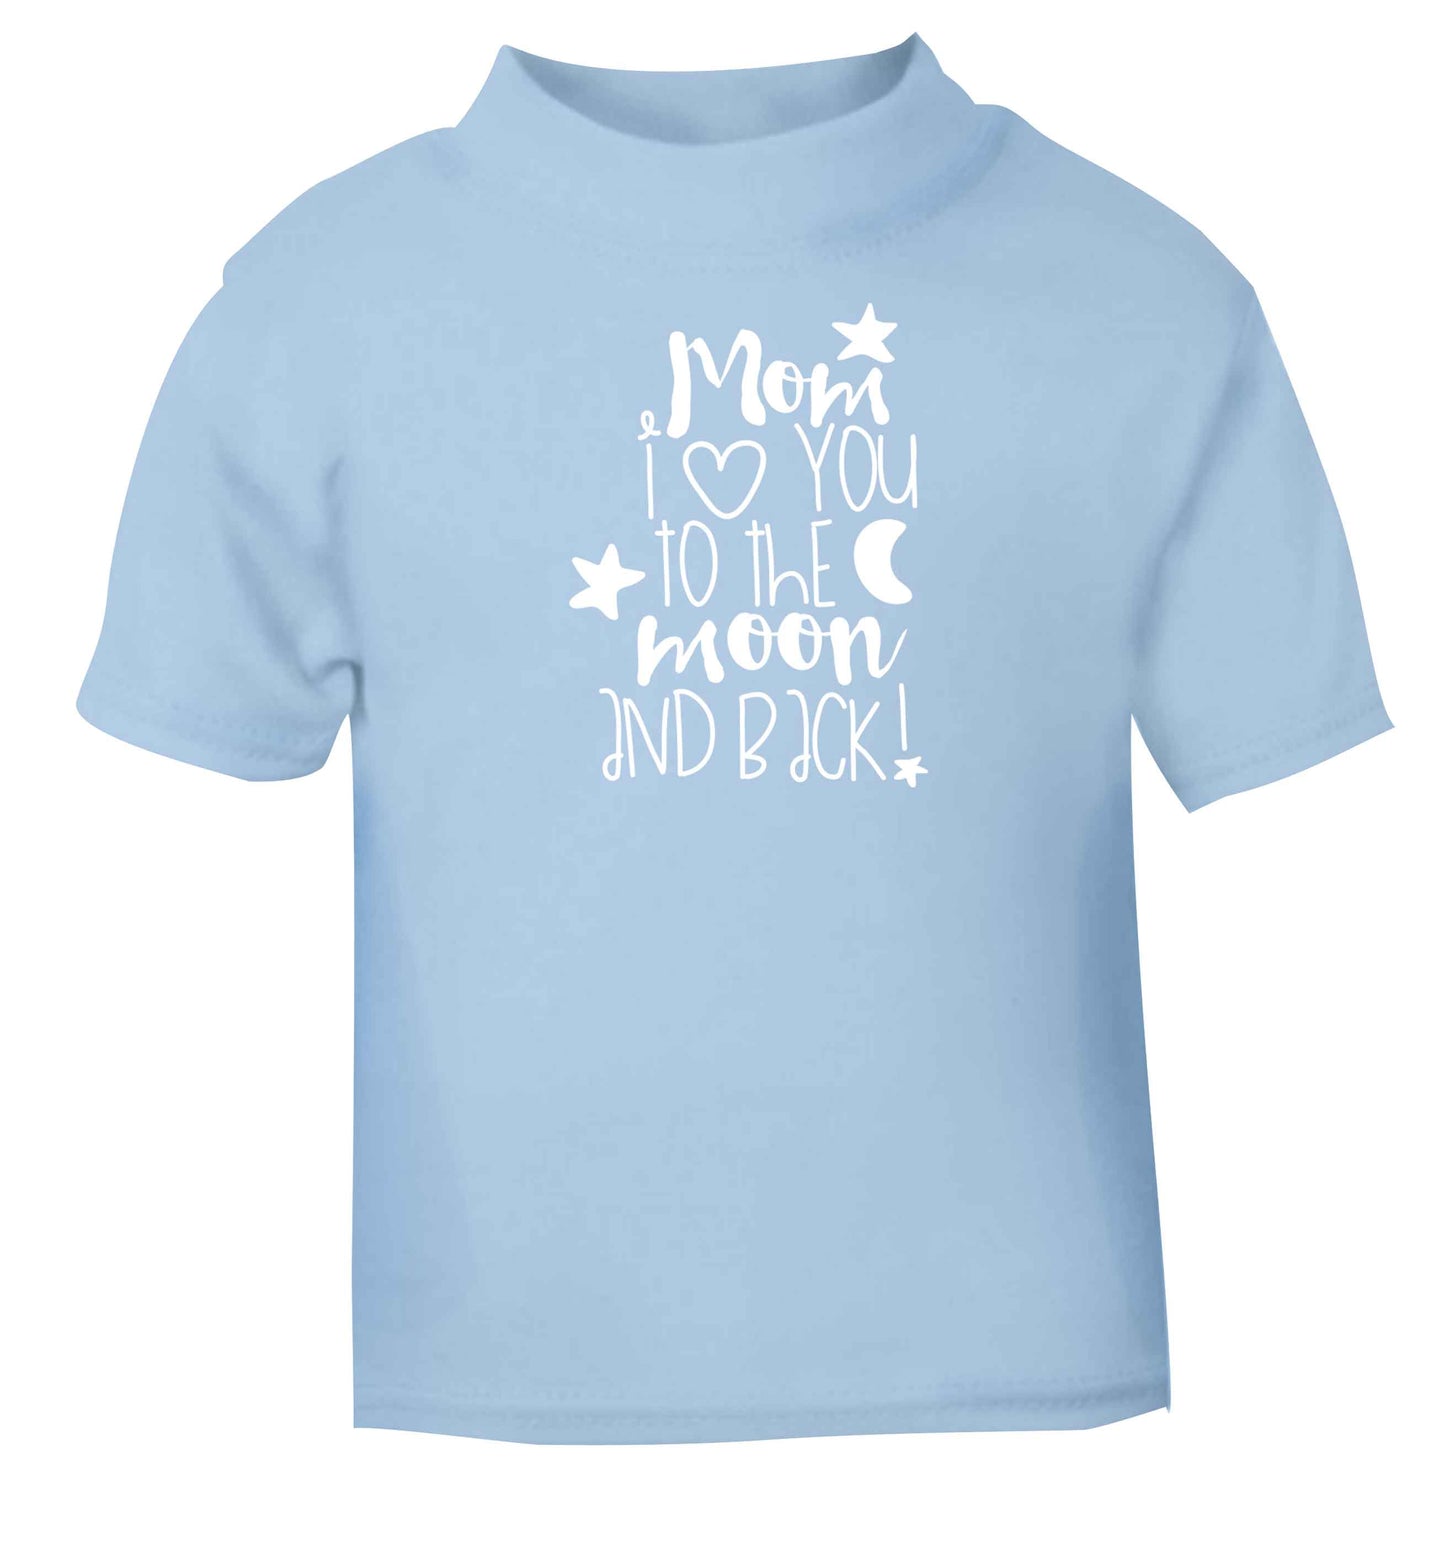 Mom I love you to the moon and back light blue baby toddler Tshirt 2 Years